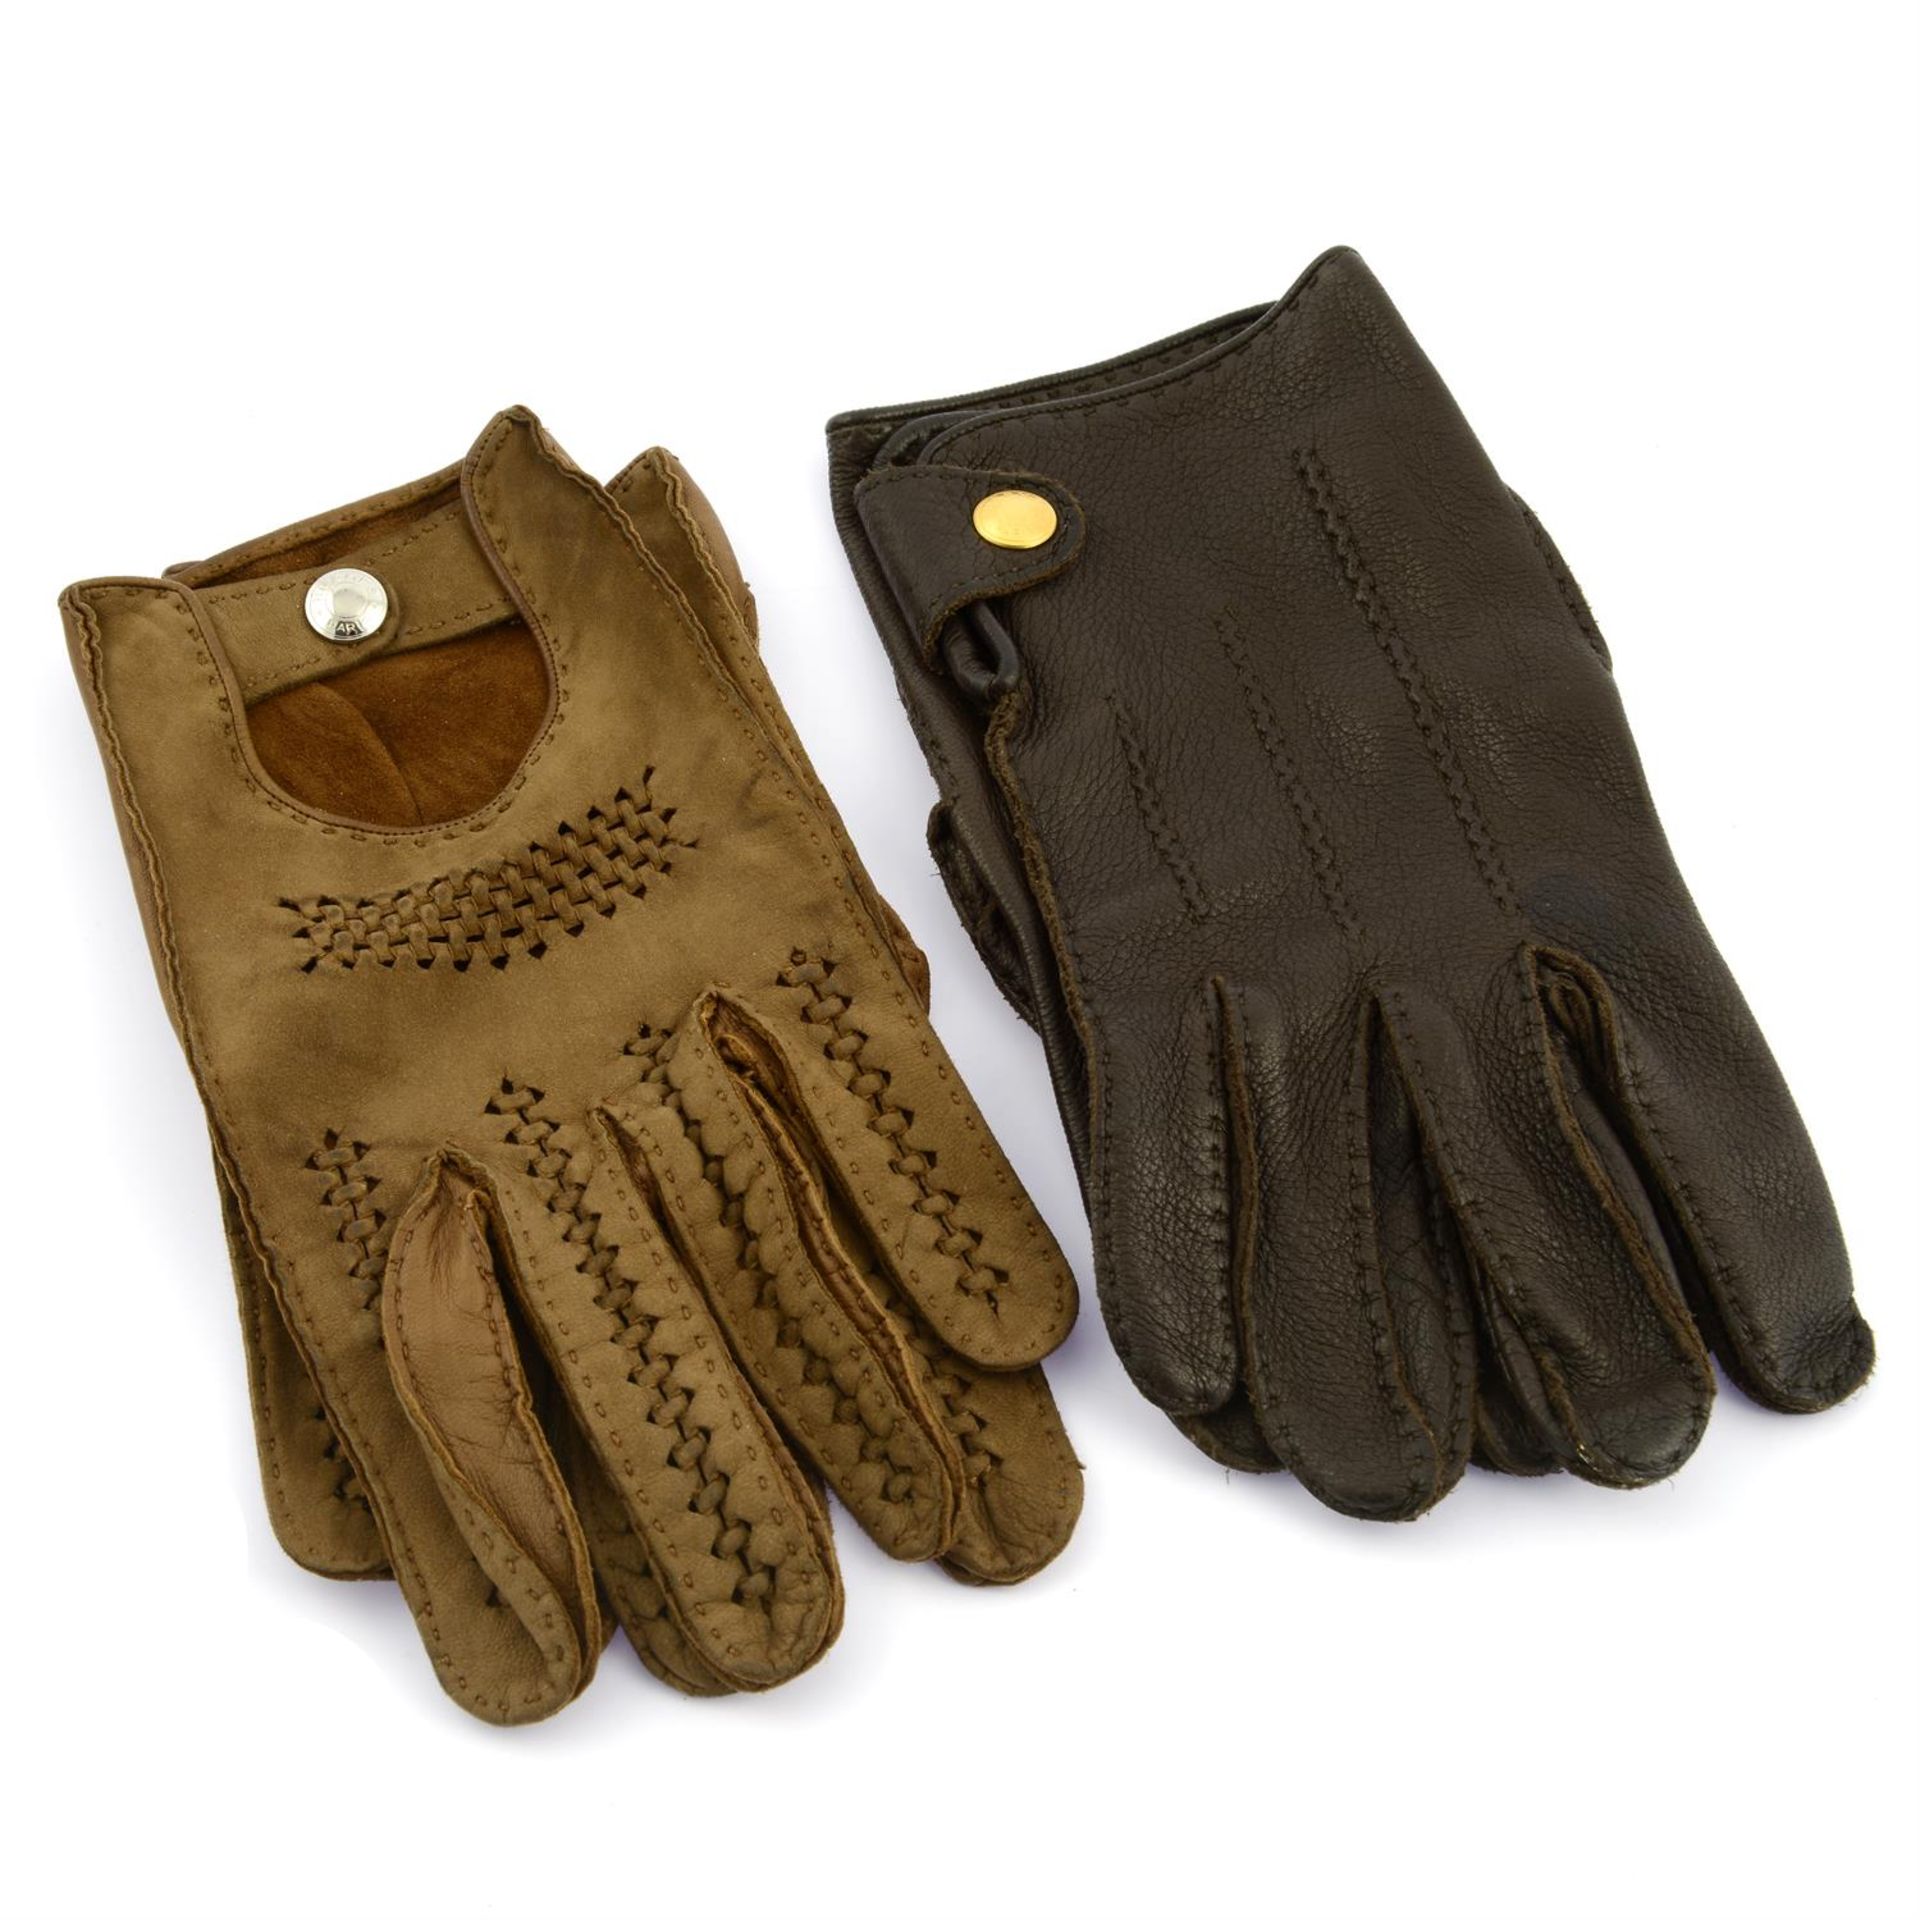 HERMÈS - two pairs of leather gloves.